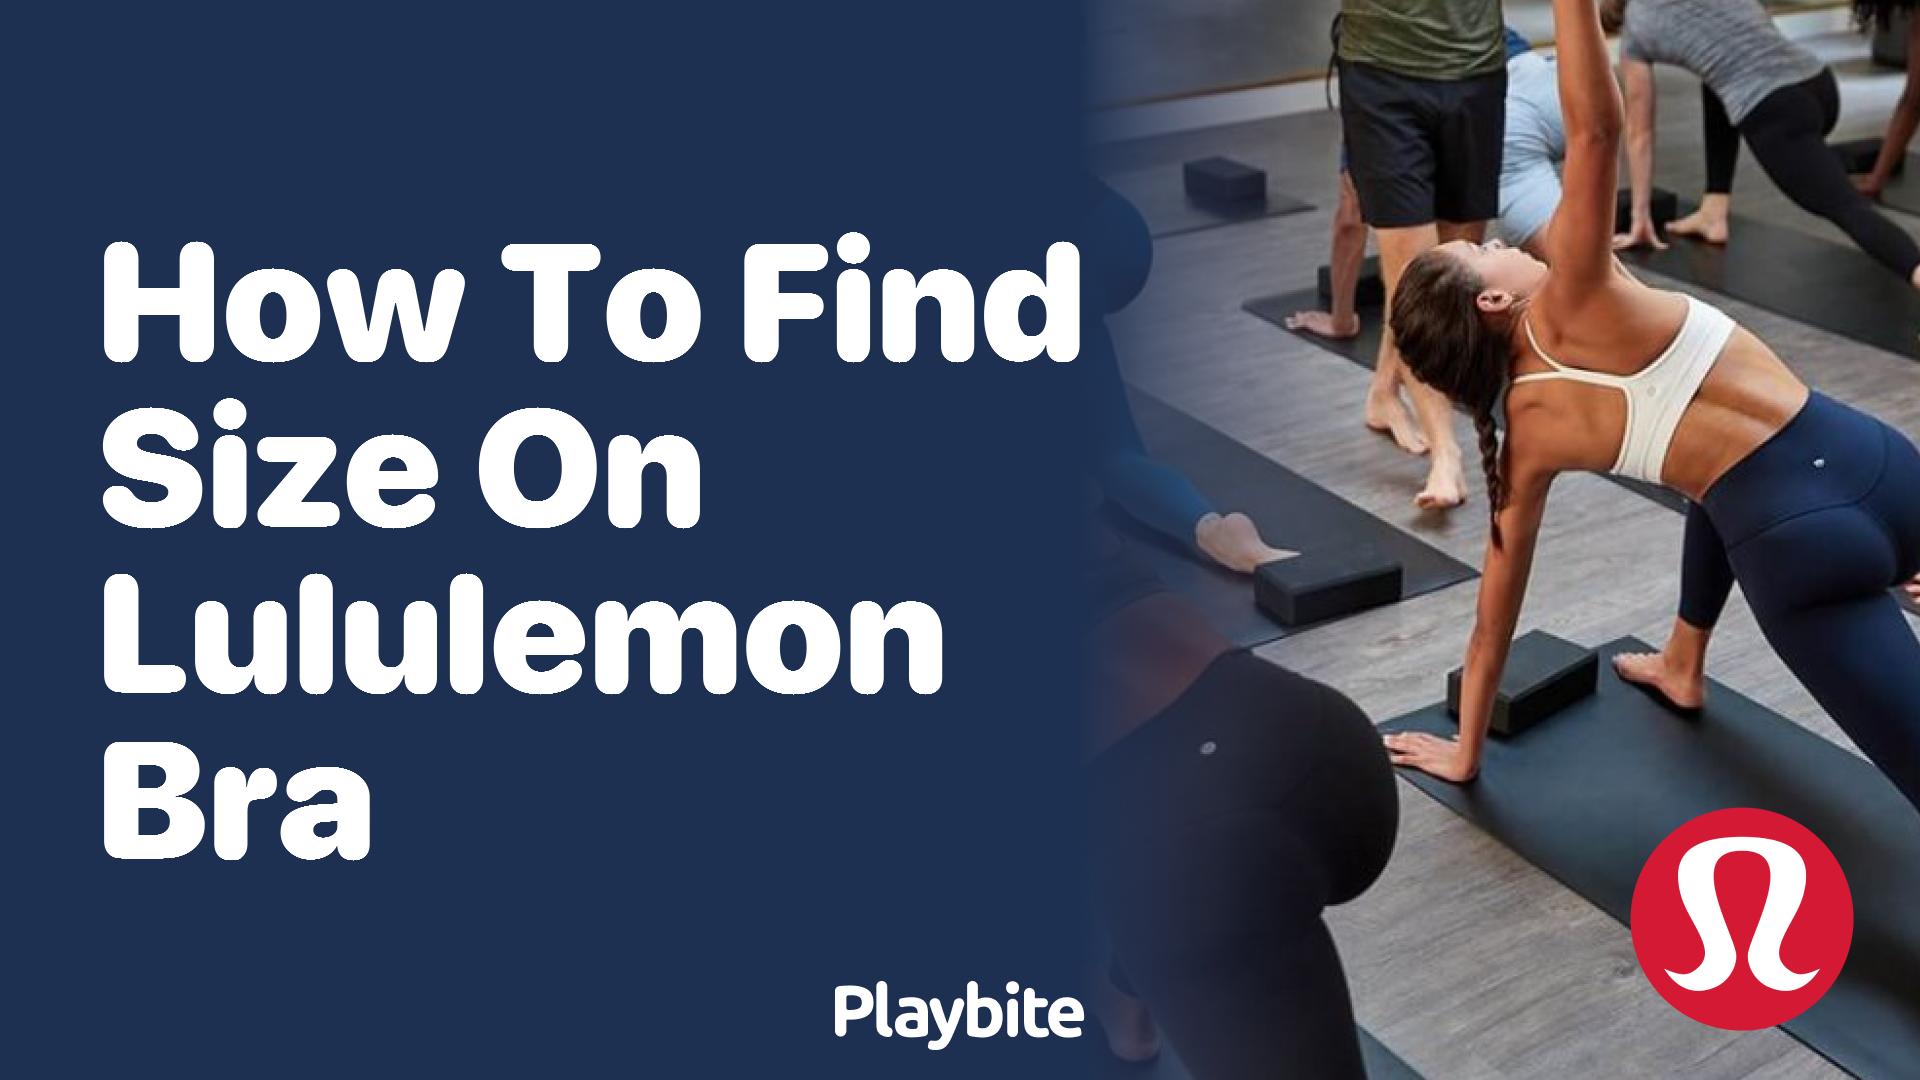 How to Find Size on Lululemon Bra: A Quick Guide - Playbite